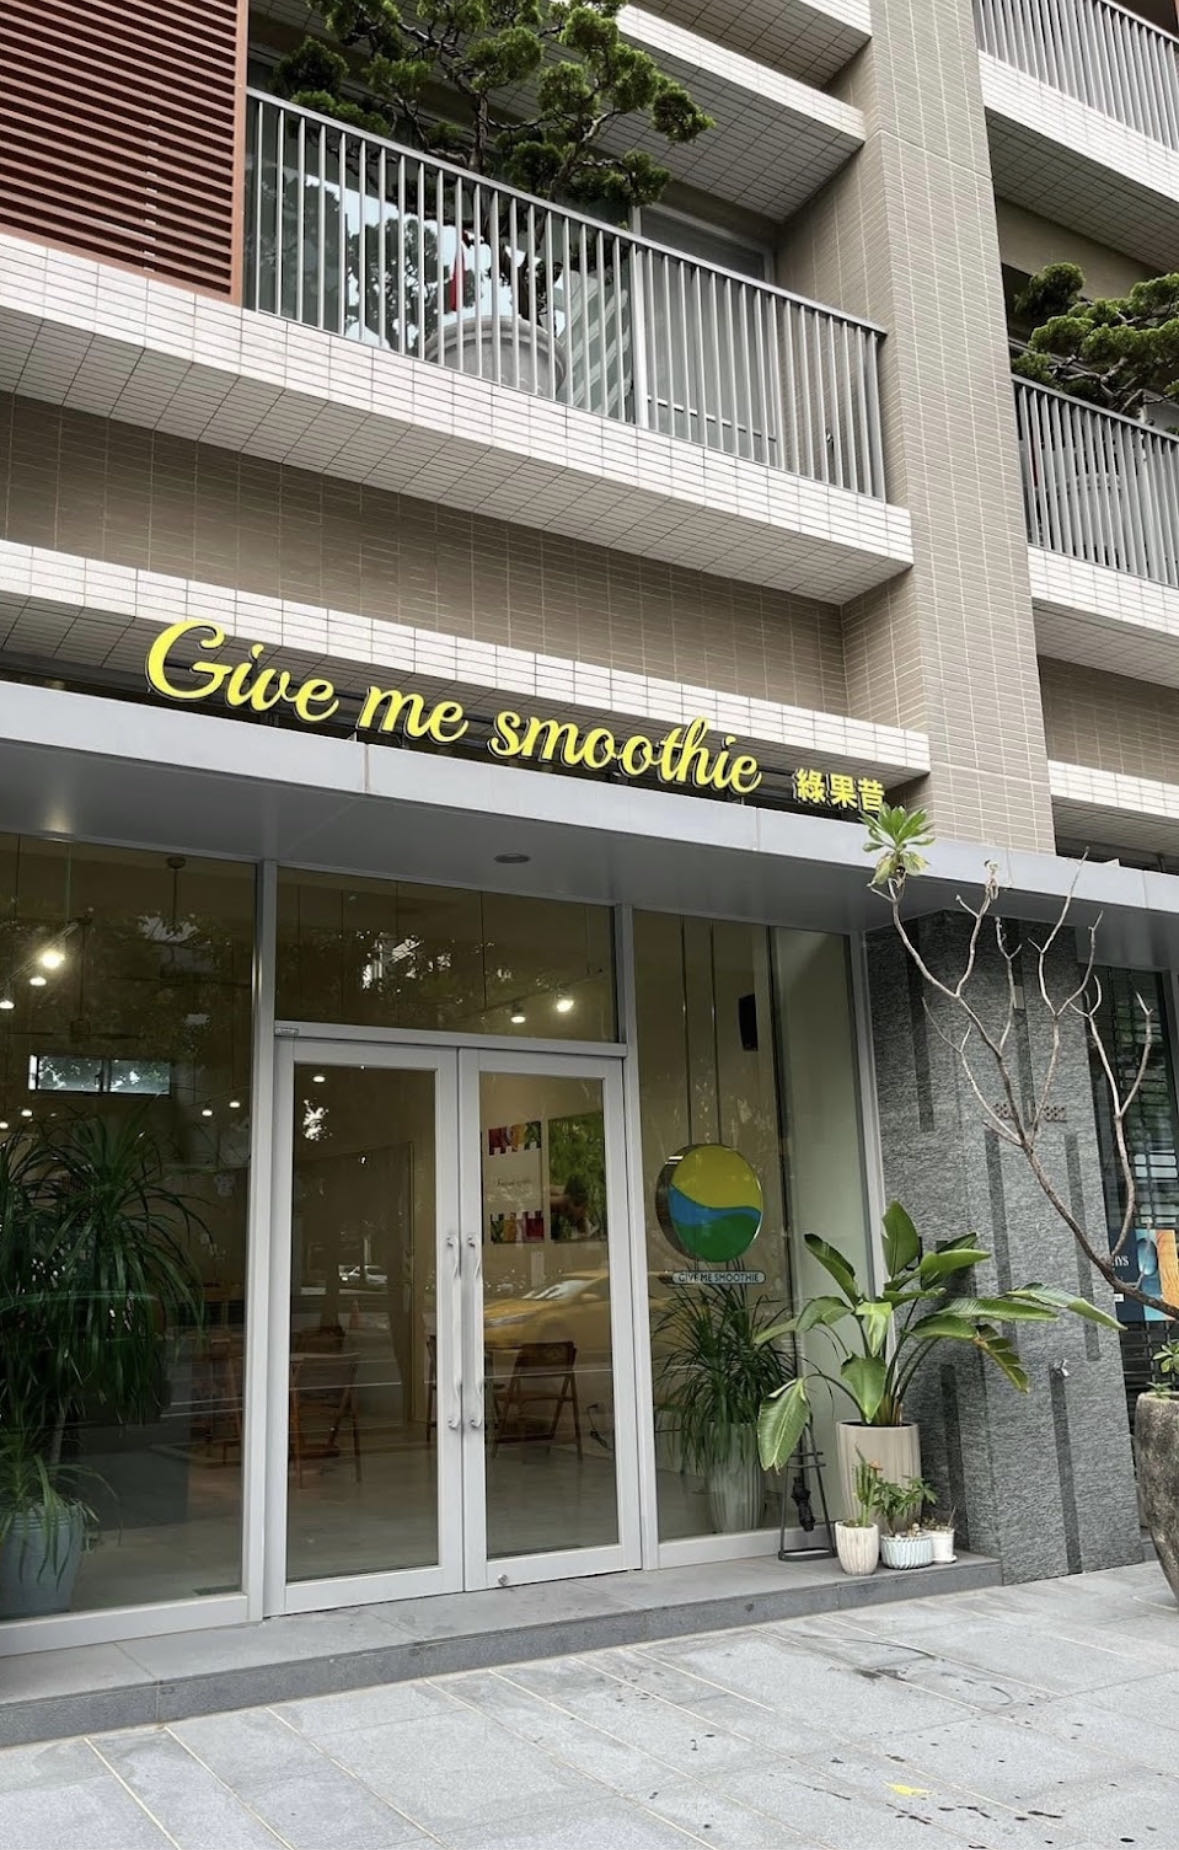 Give me smoothie(嘉硯企業社)相關照片4